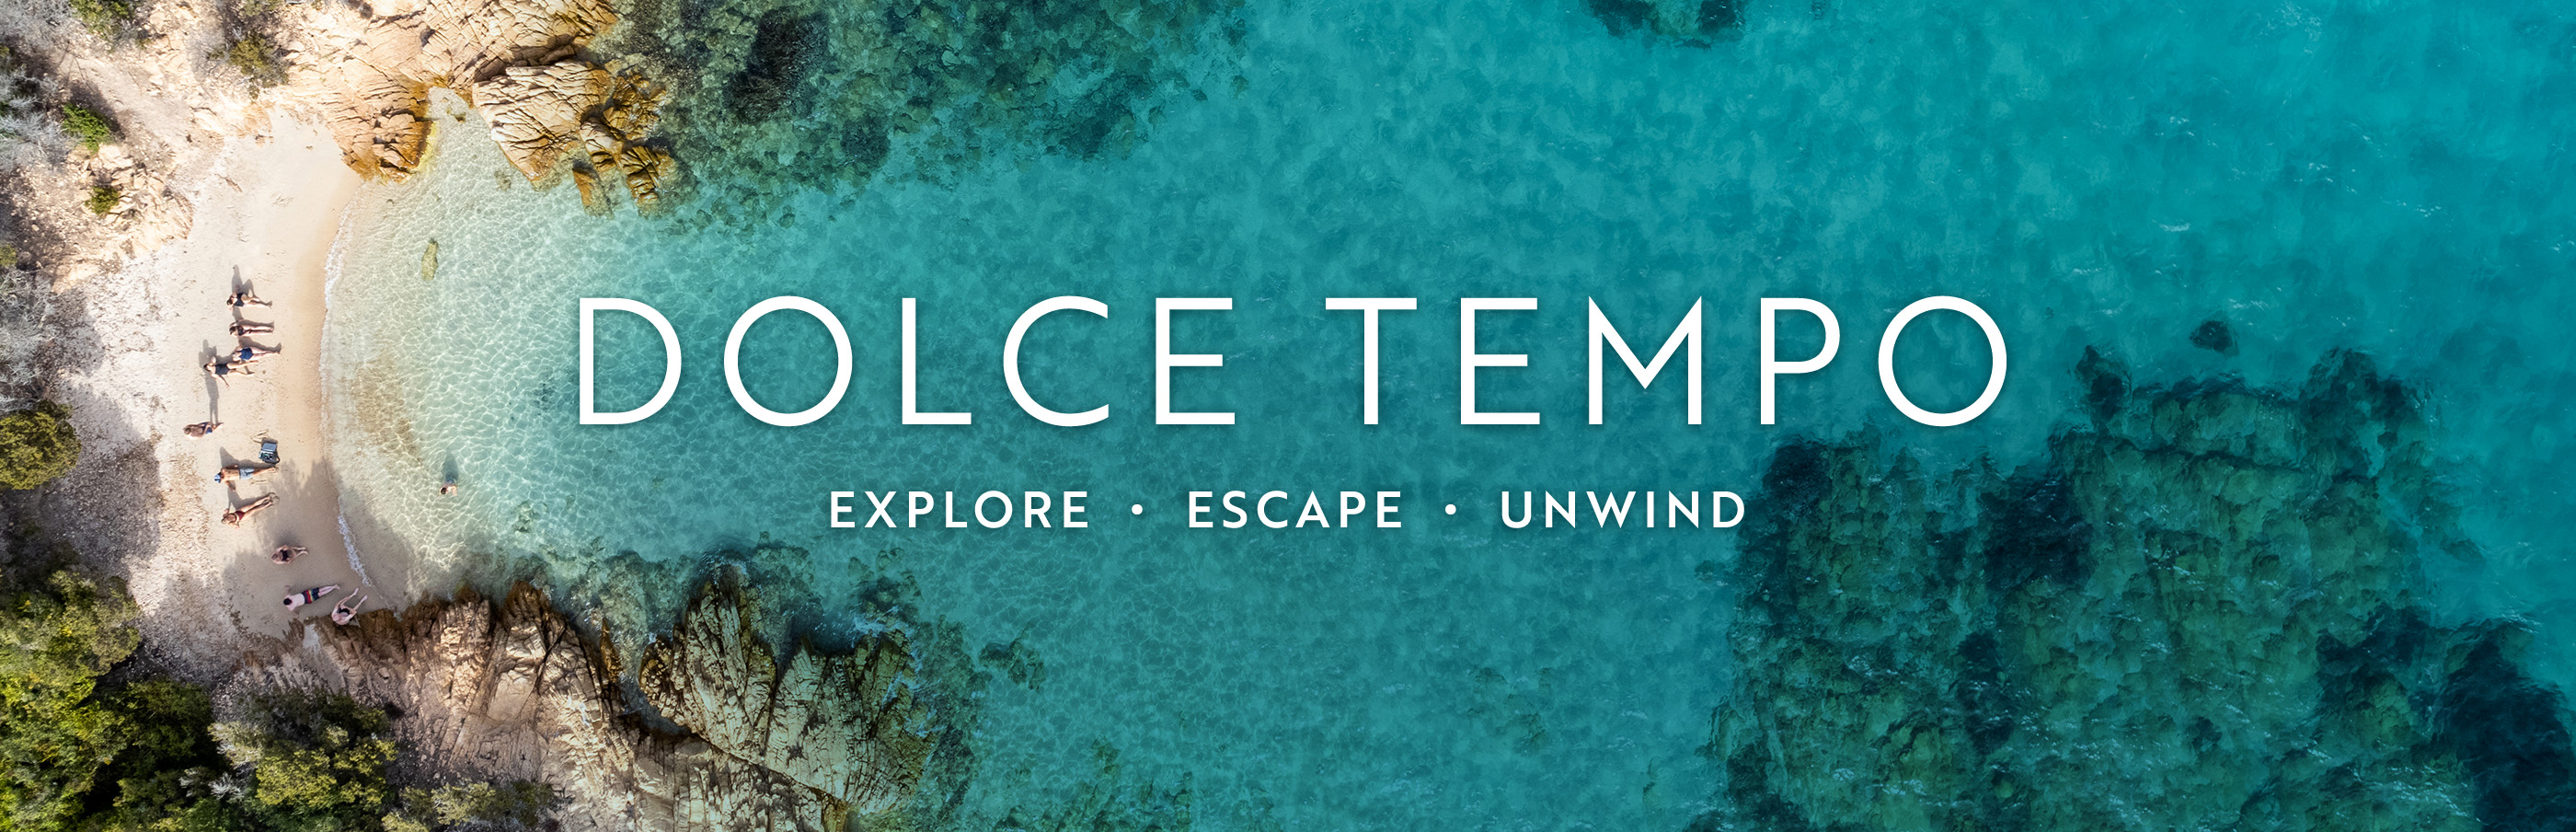 dolce tempo tours